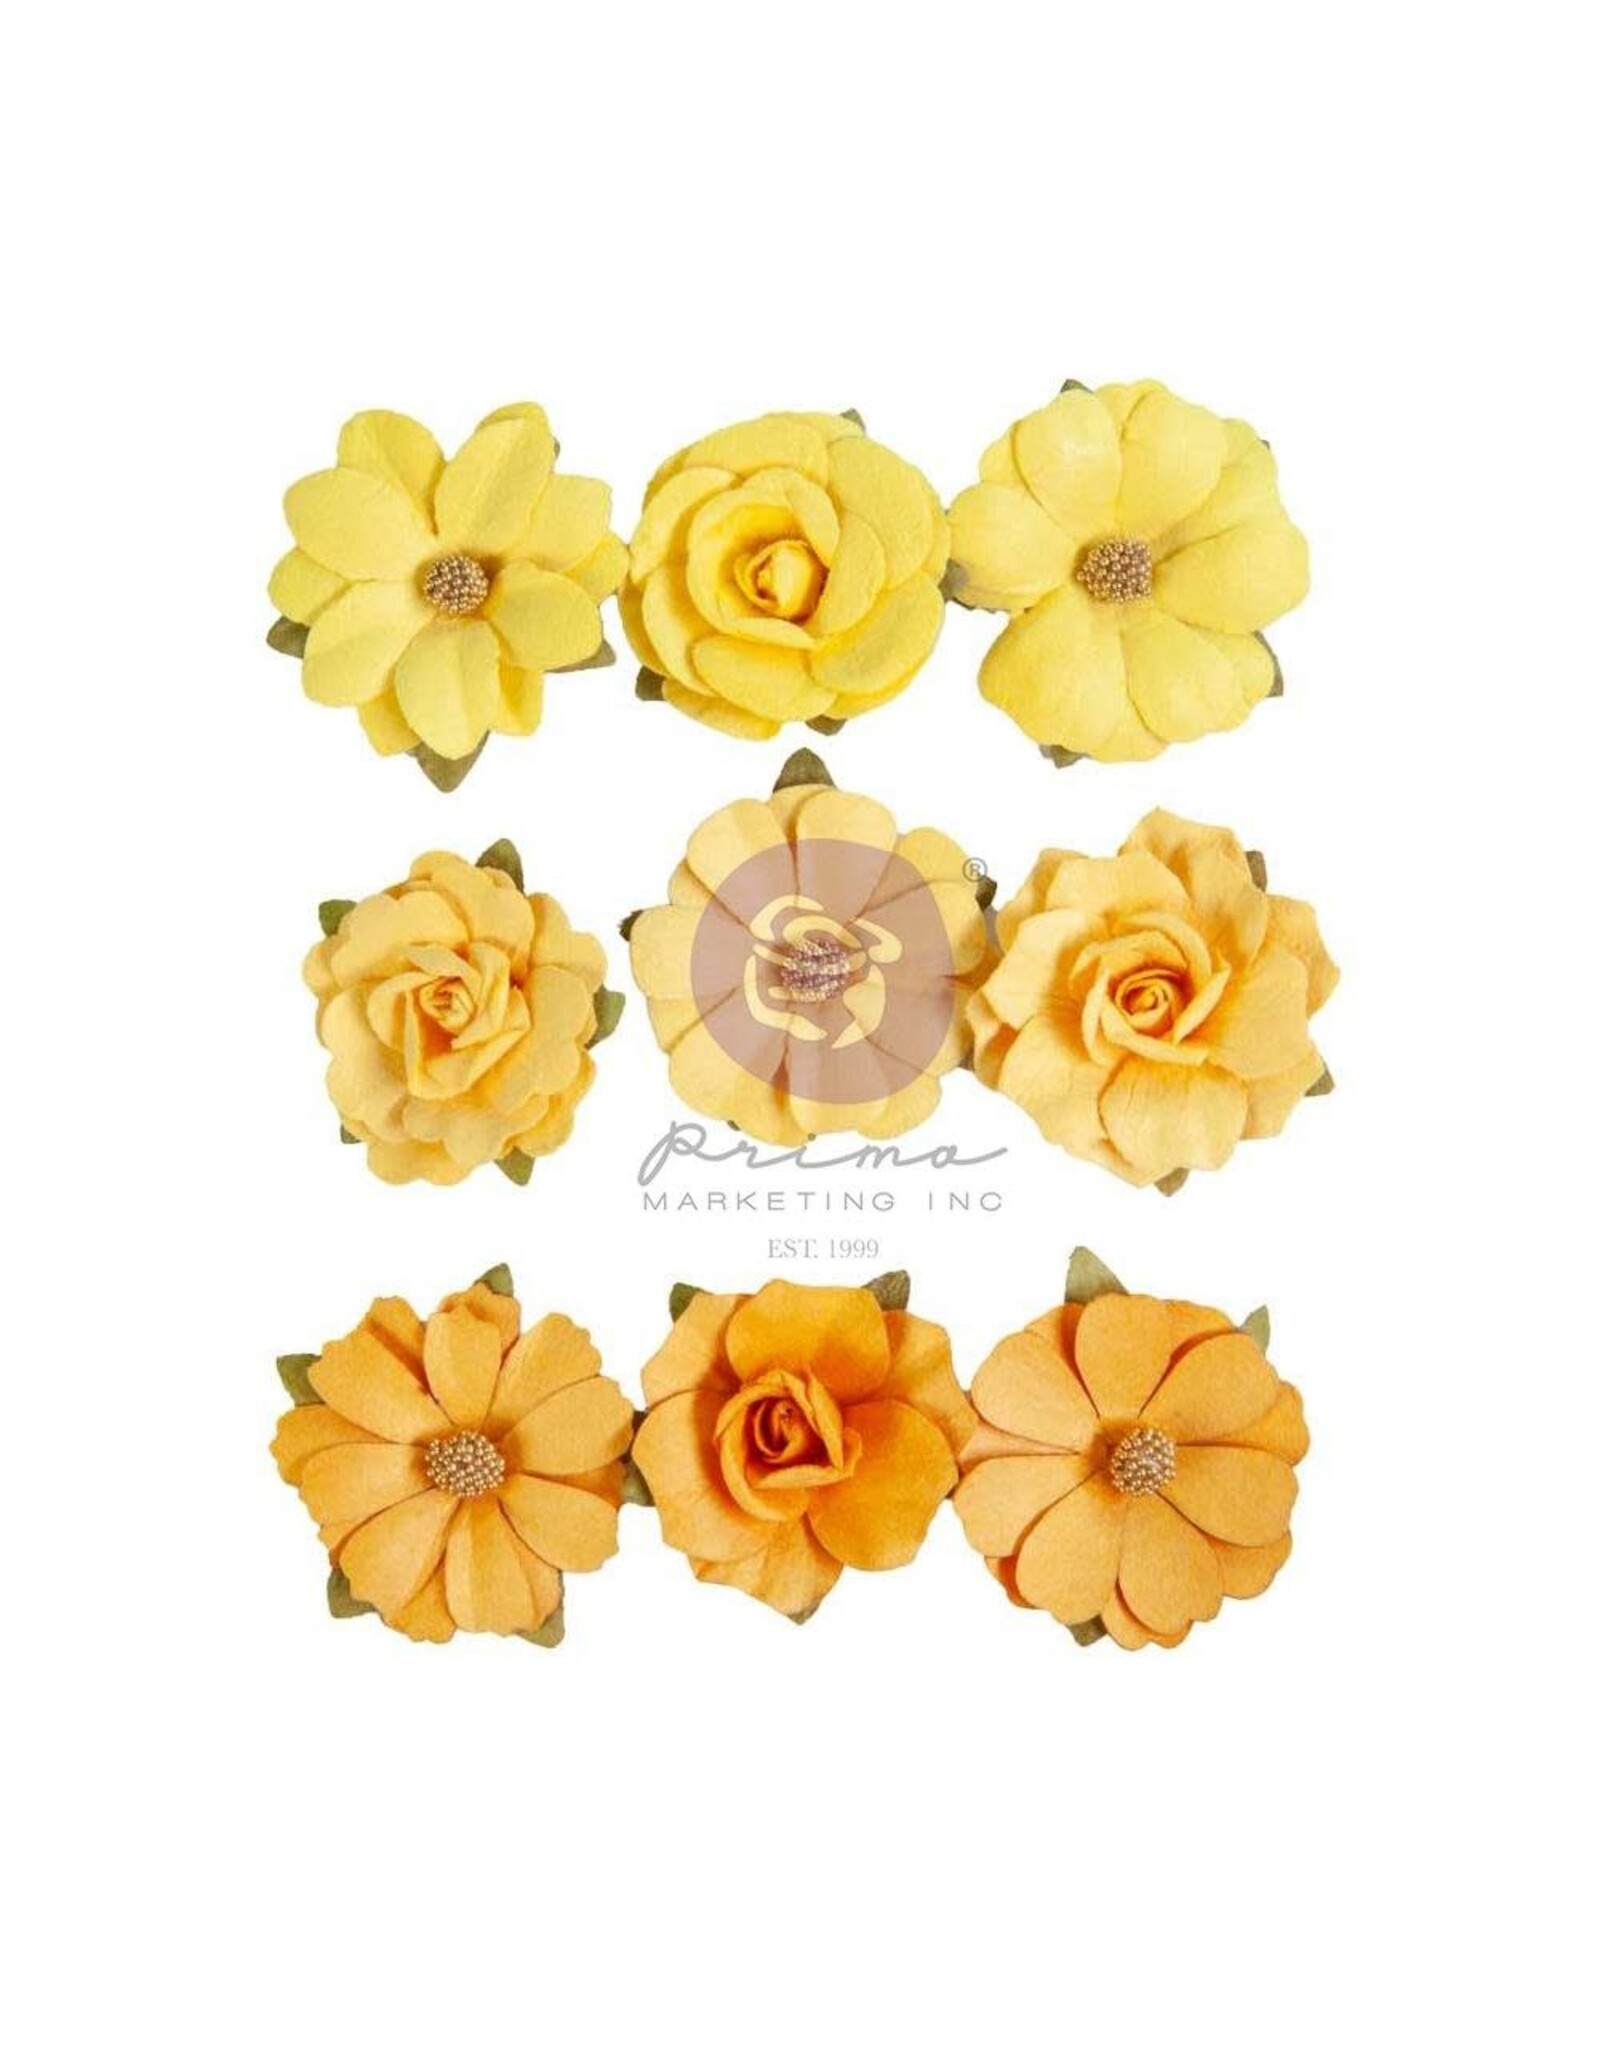 PRIMA PRIMA THE 3 GIRLS IN FULL BLOOM WARM SUNSHINE PAPER FLOWERS 9 PIECES